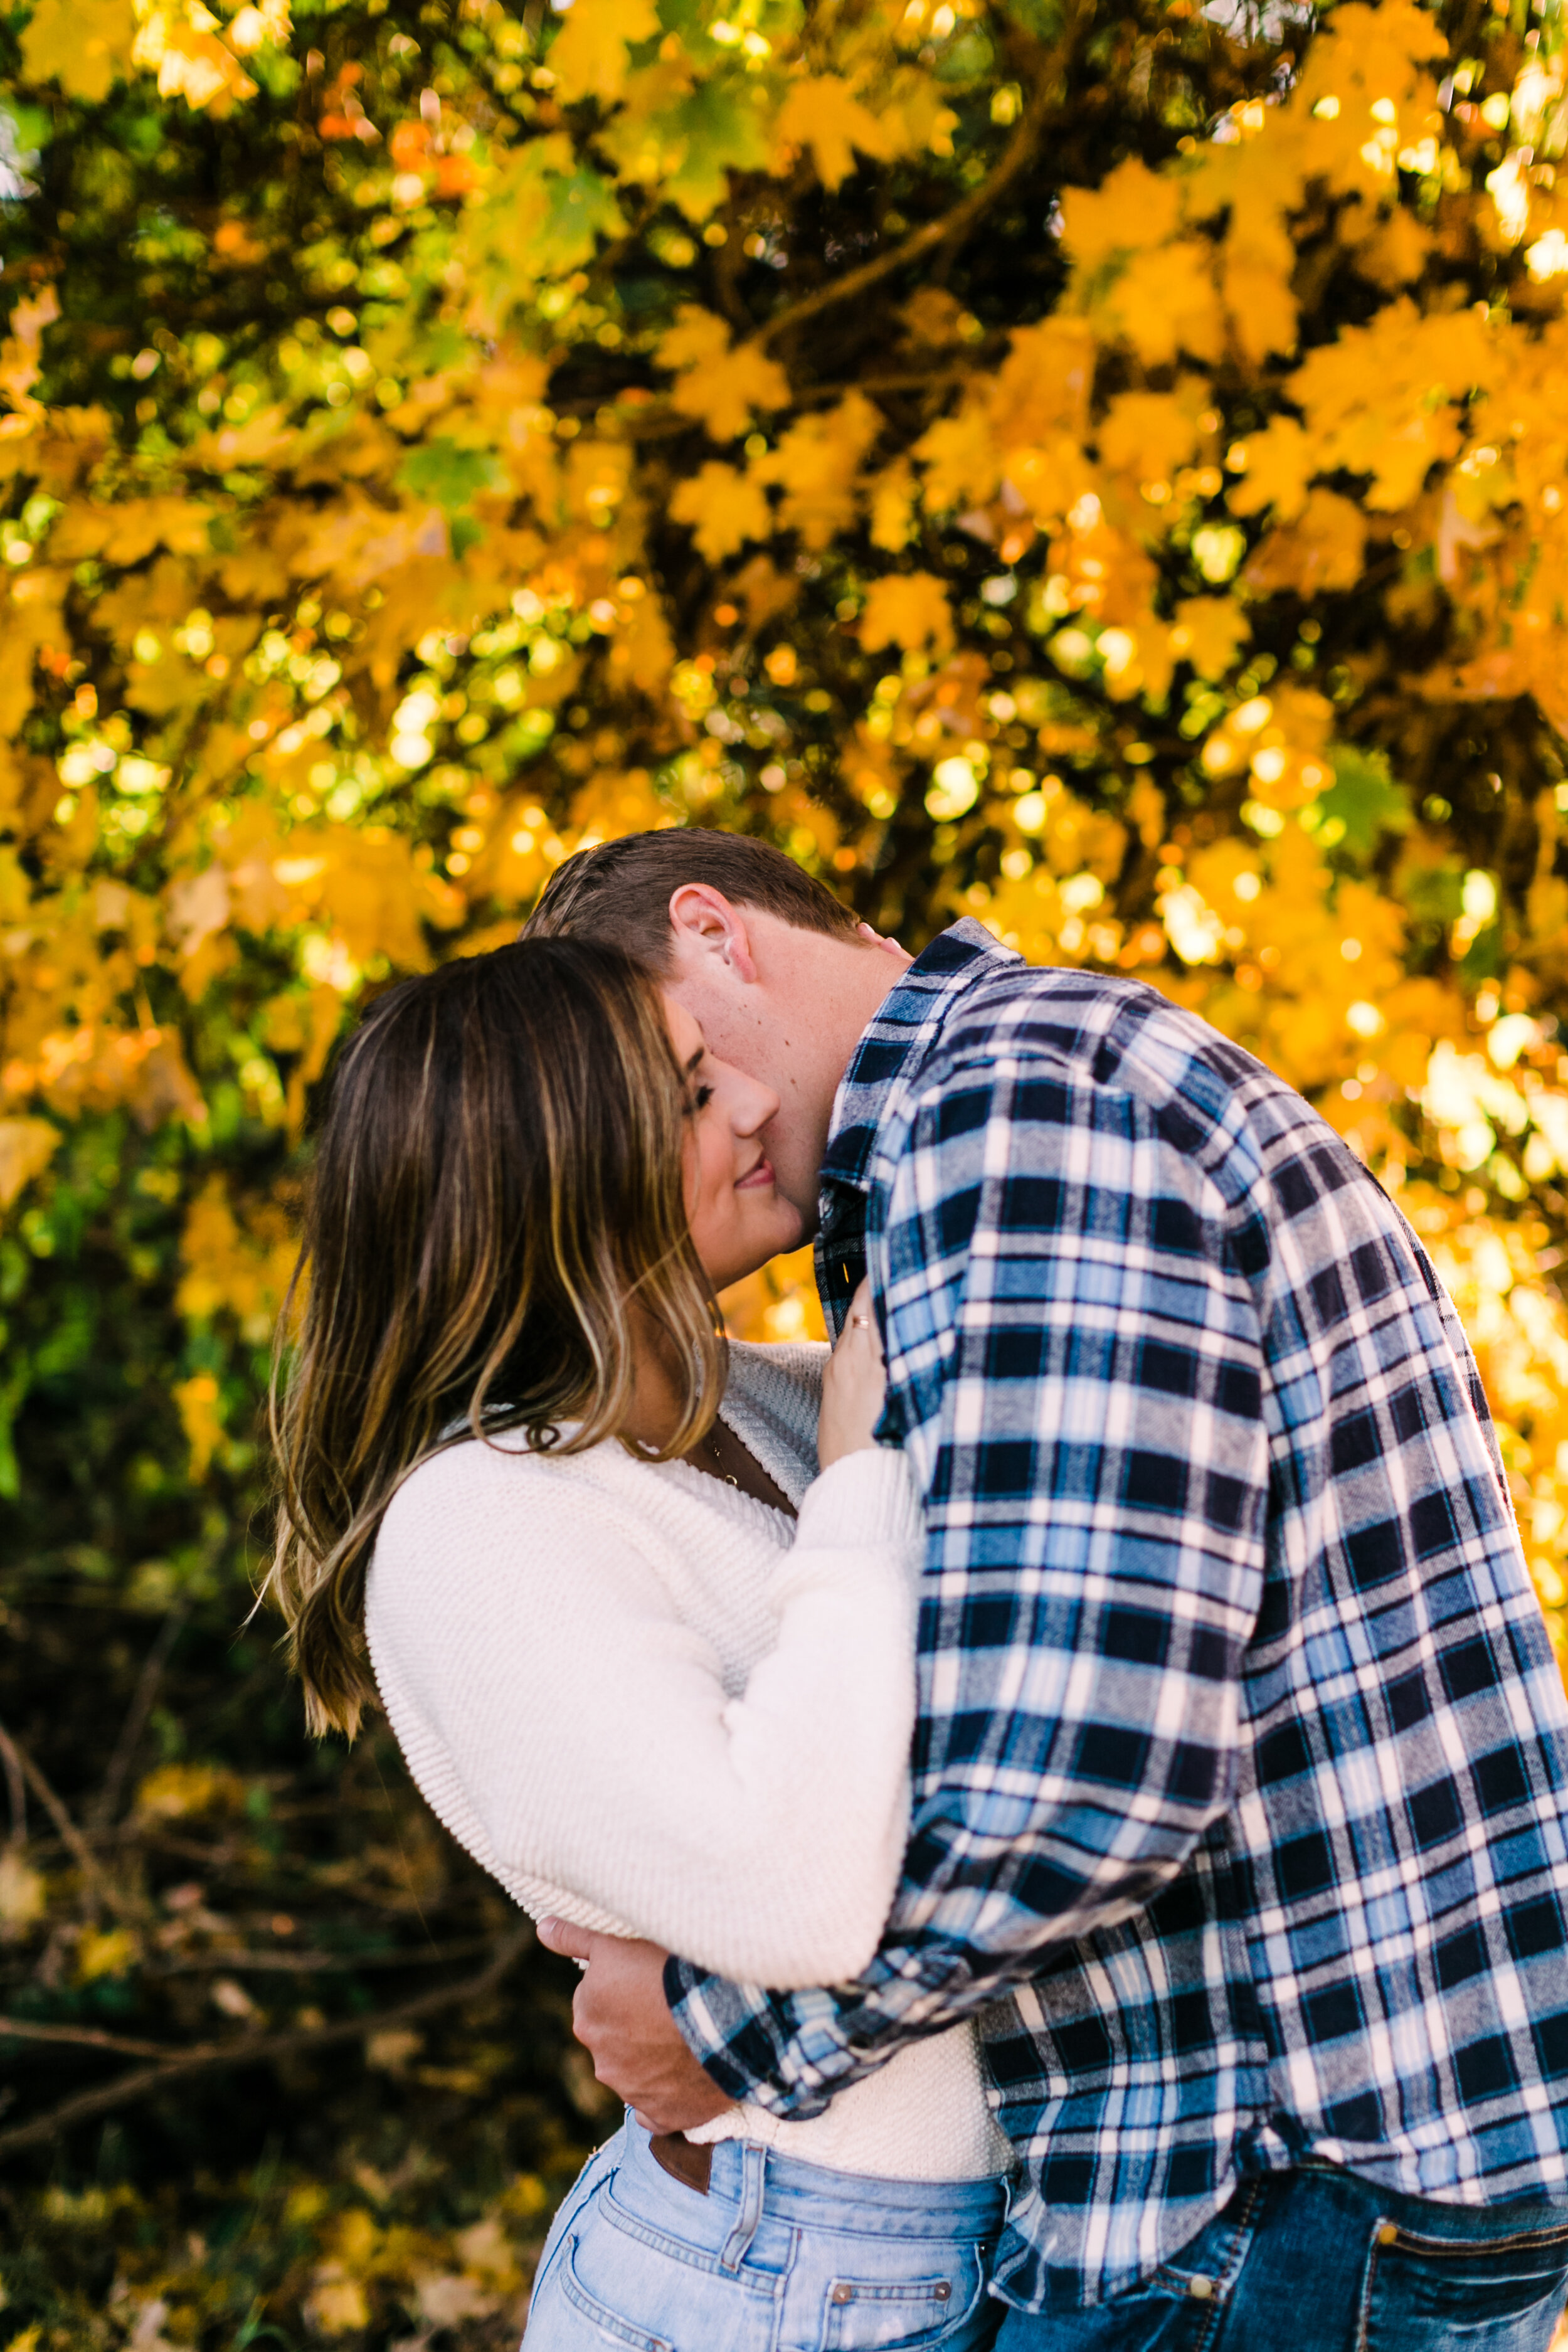 Tennessee+Fall+Engagement+Photos+Puppy (28 of 63).jpg